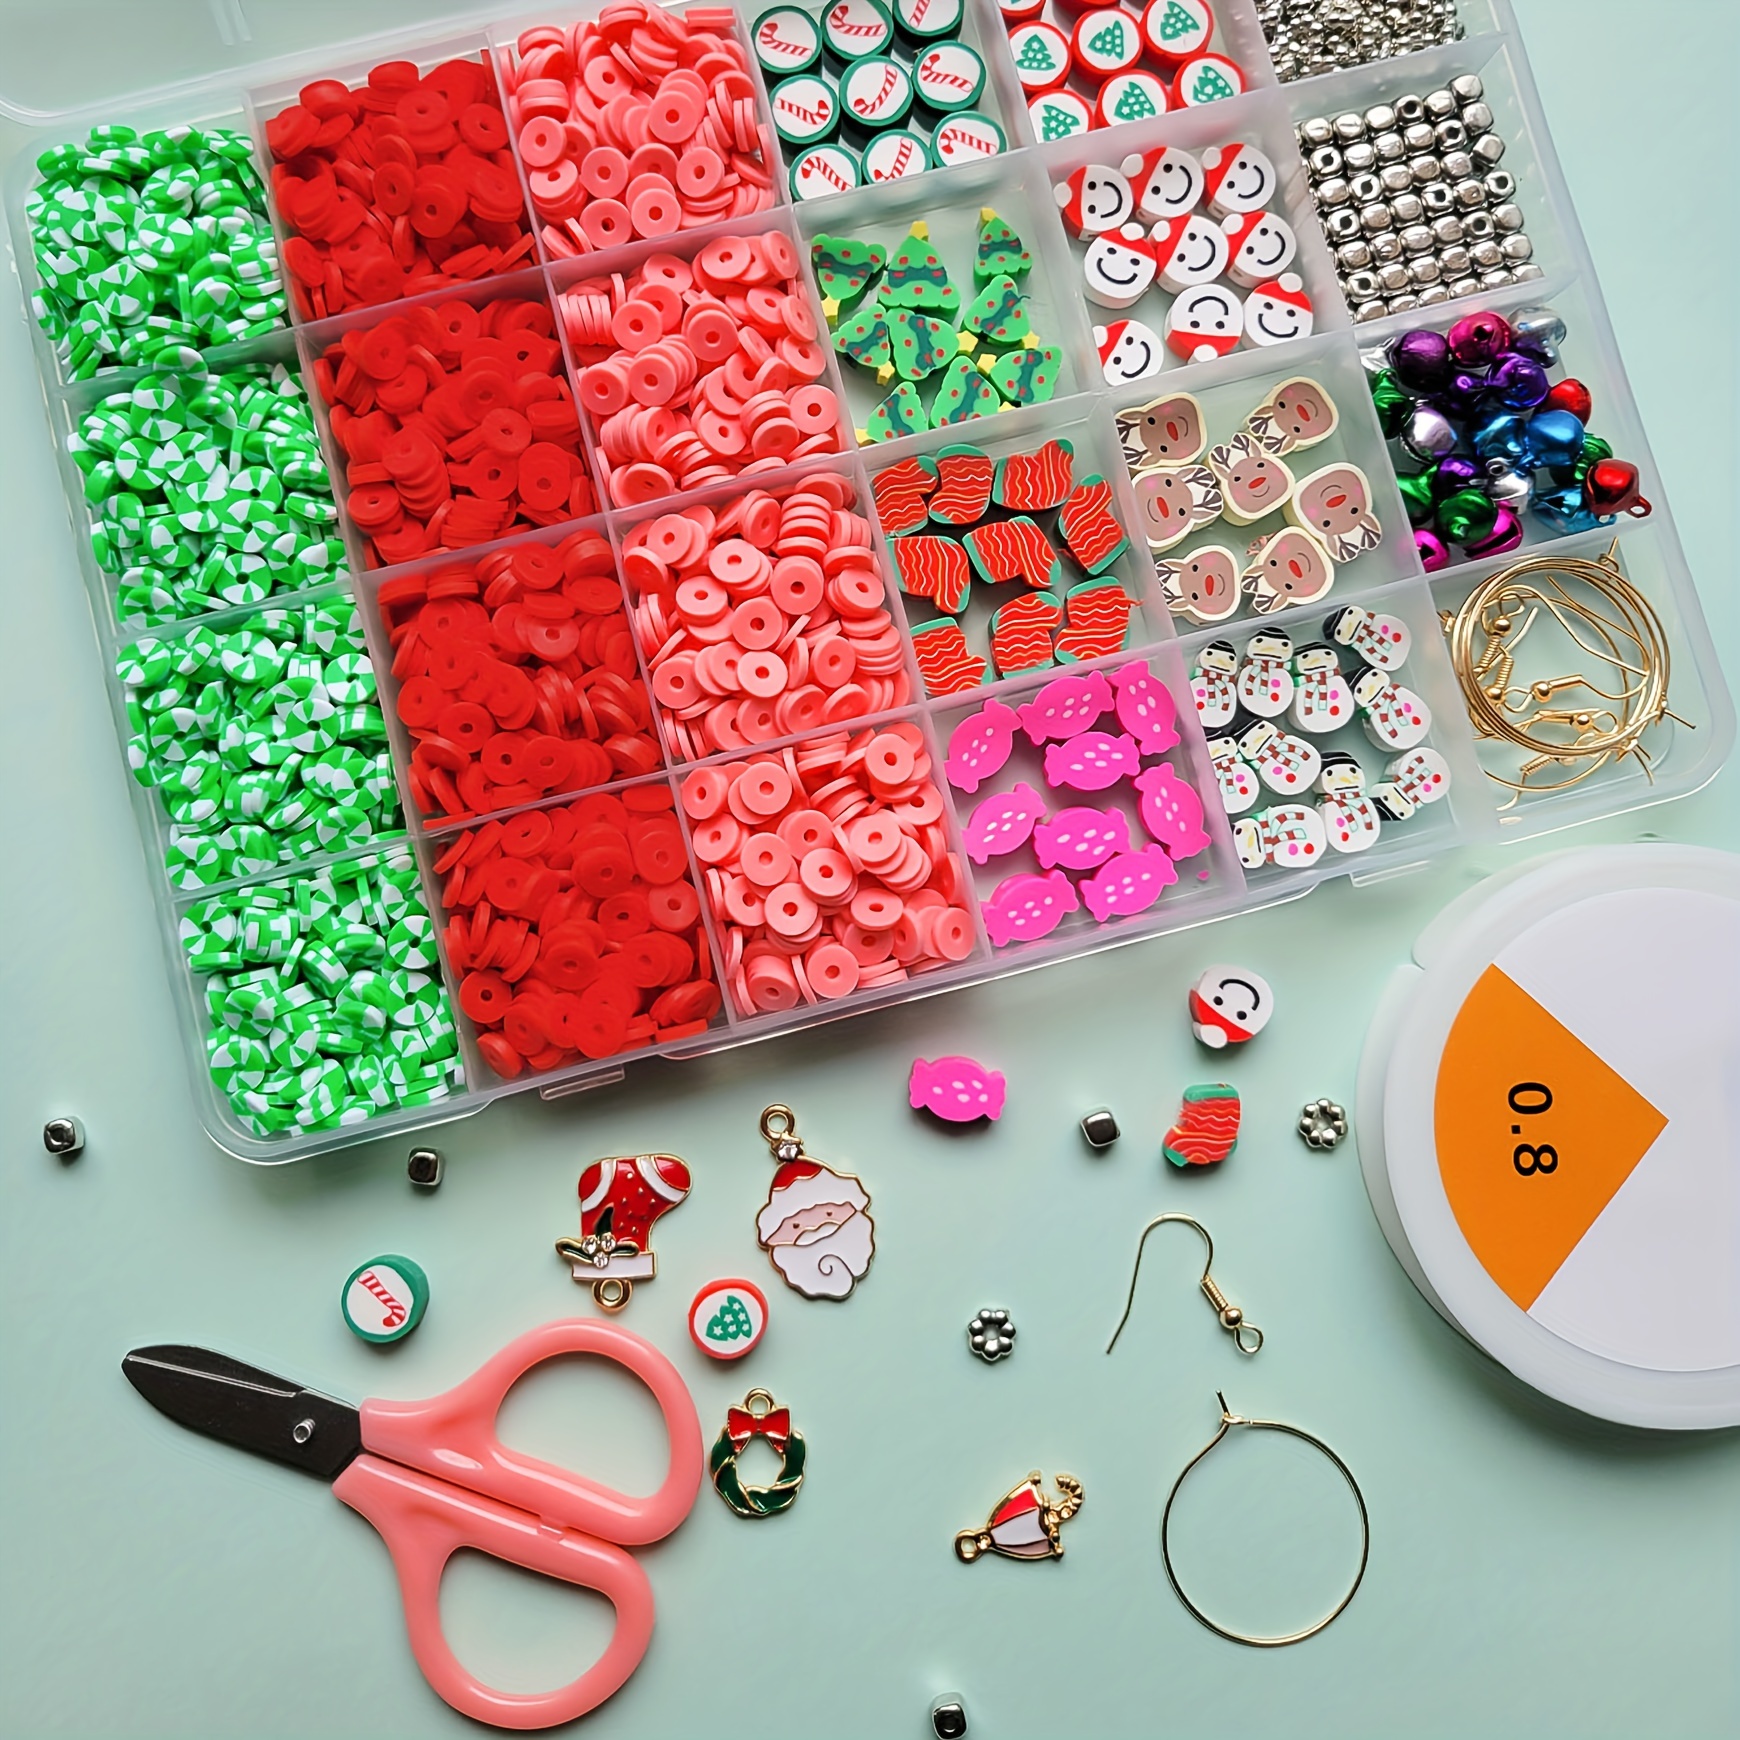 DIY Colorful Polymer Clay Earrings Craft Kit, DIY Craft Kit, Gifts